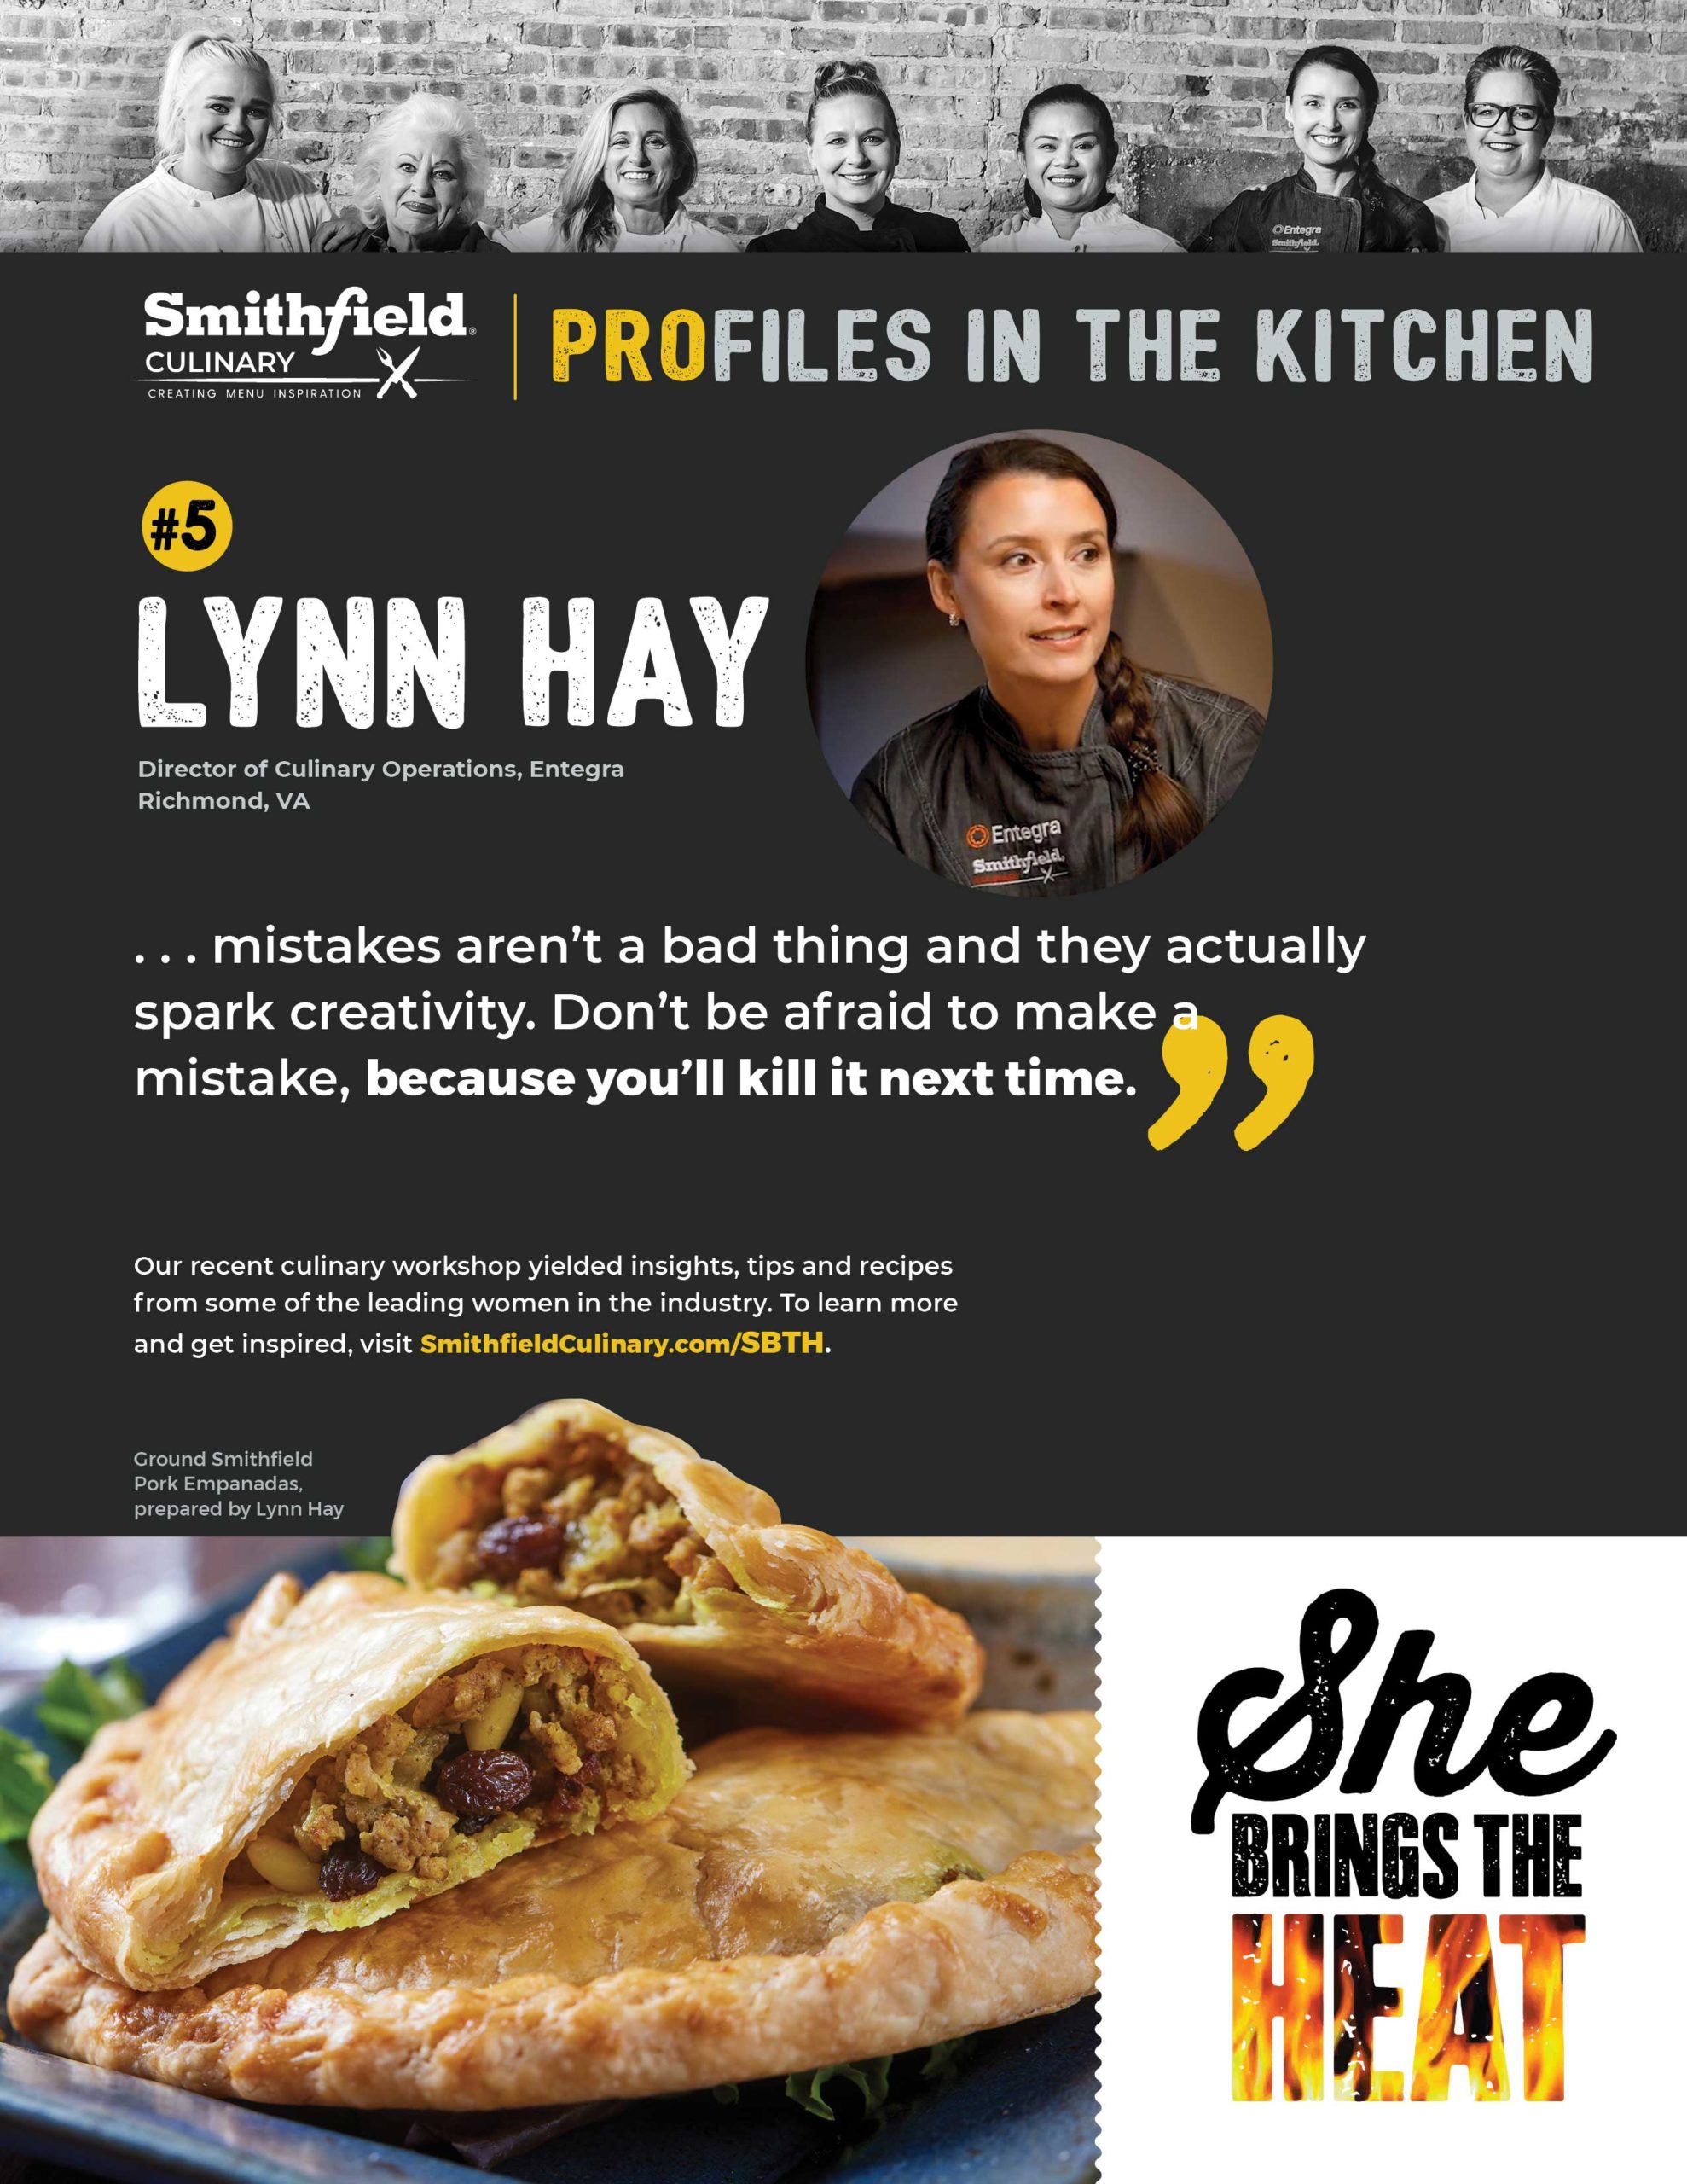 FoodMix Female Chef Spotlight Campaign for Smithfield Culinary